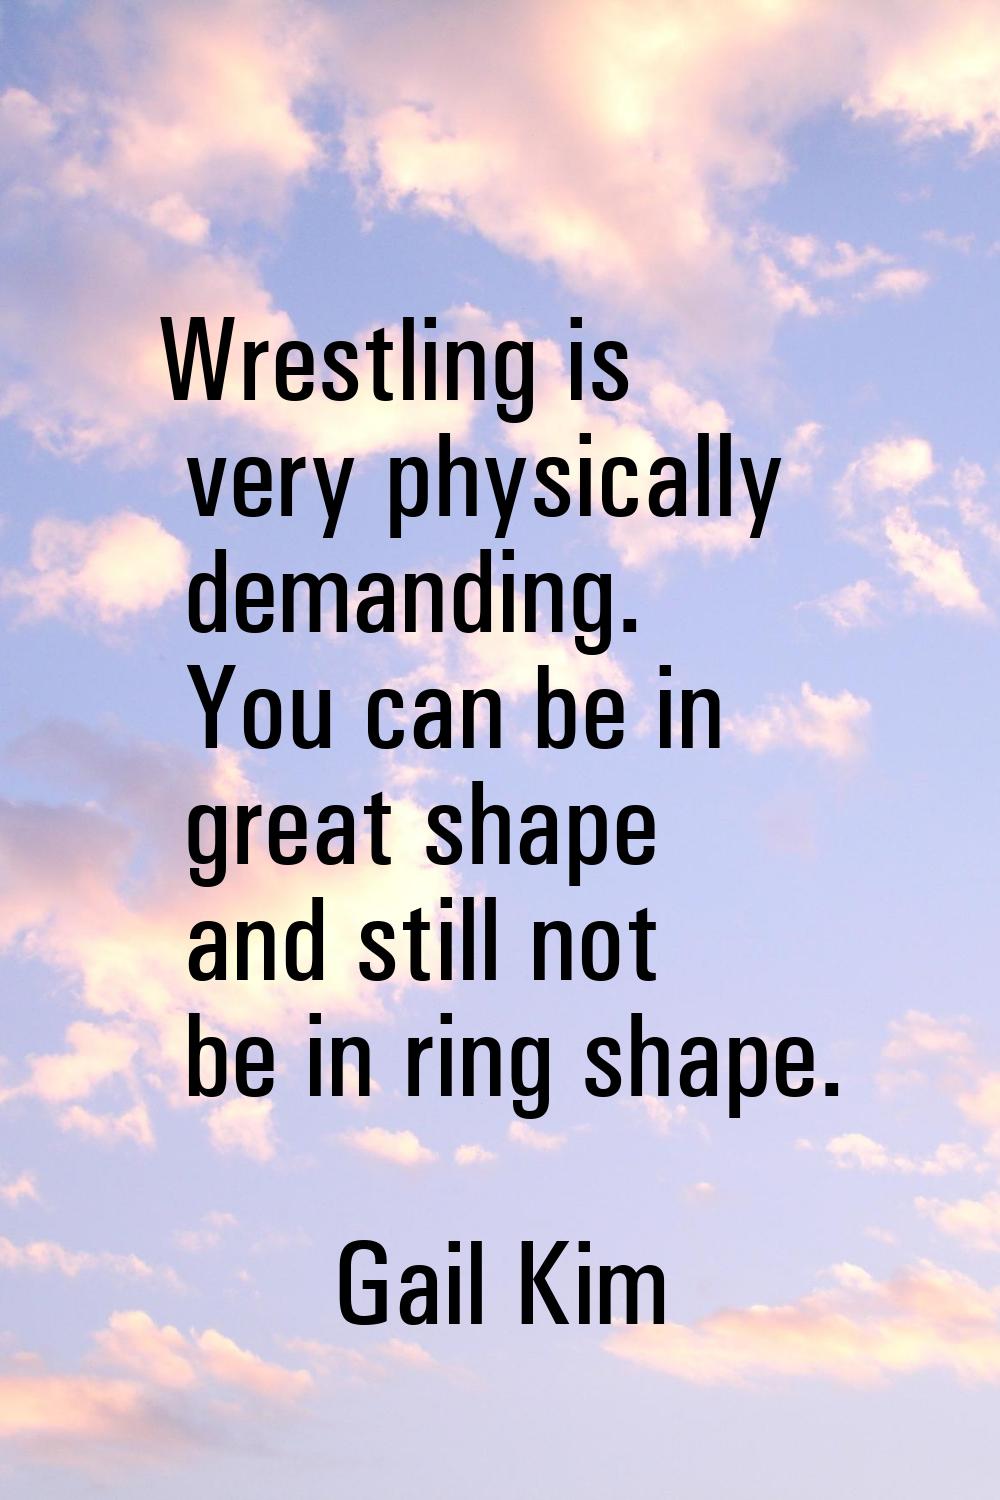 Wrestling is very physically demanding. You can be in great shape and still not be in ring shape.